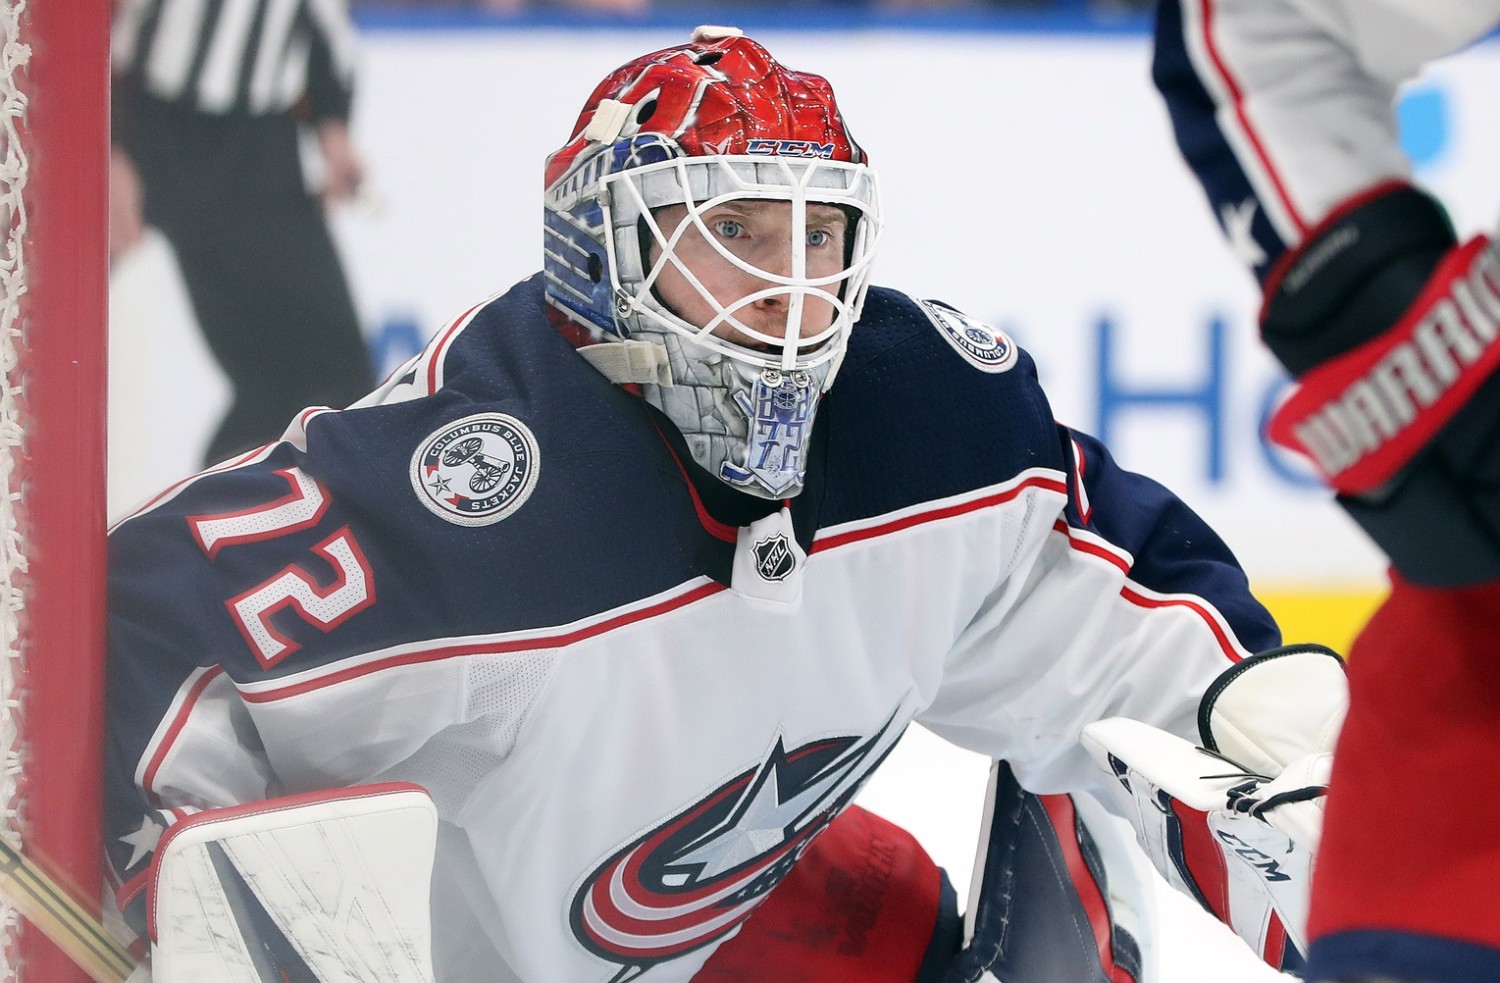 Sergei Bobrovsky didn't dress for the Columbus Blue Jackets last night. Are his days in Columbus numbered?